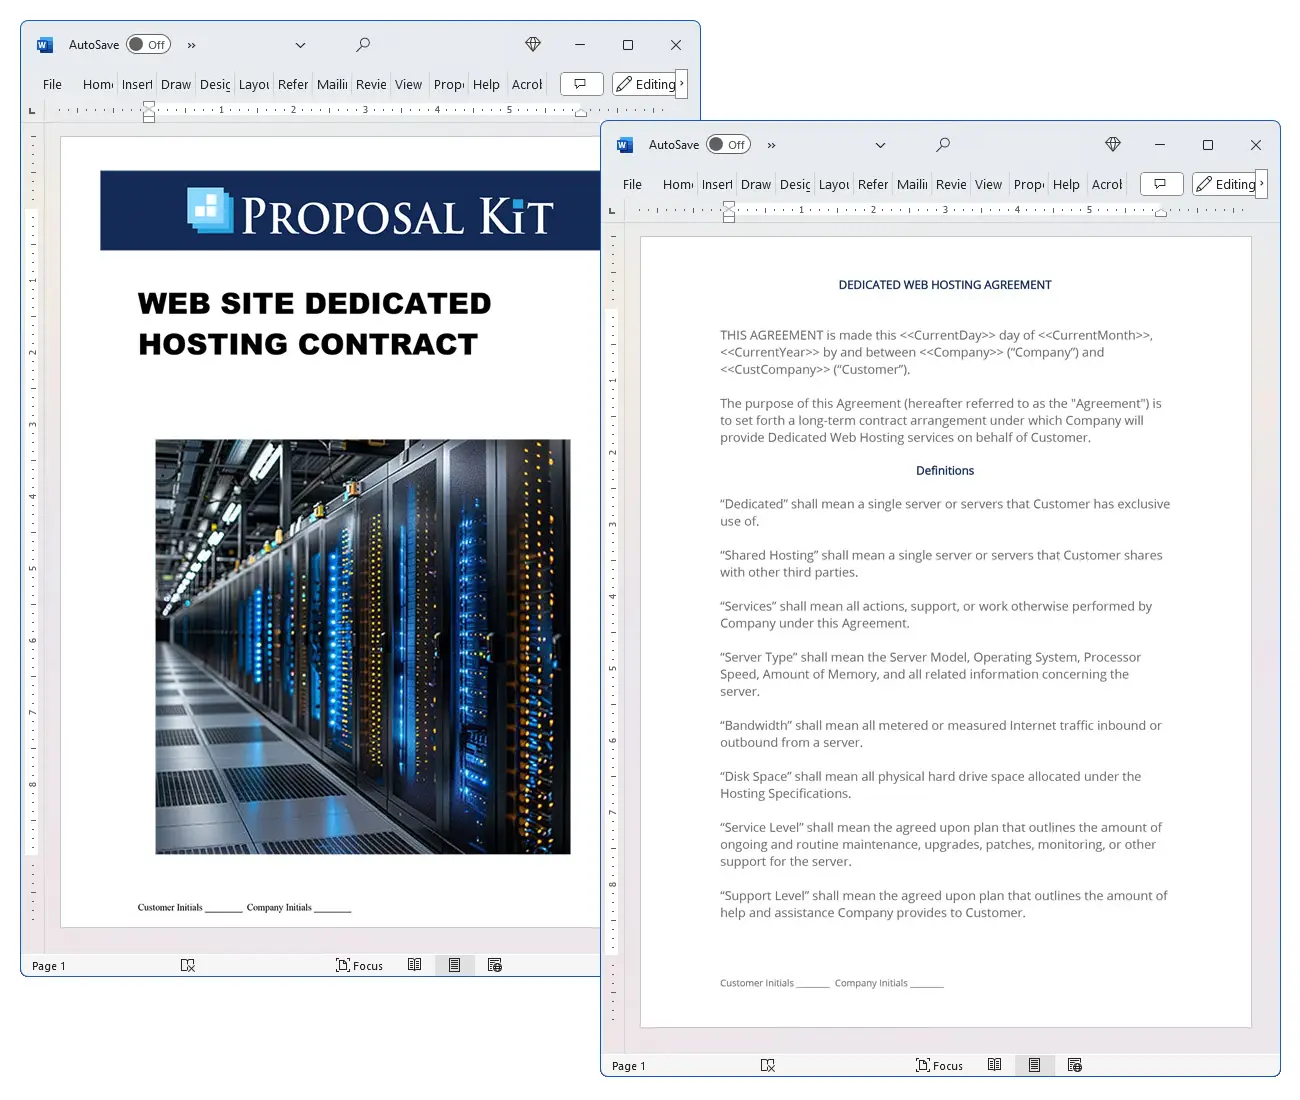 Web Site Dedicated Hosting Contract Concepts